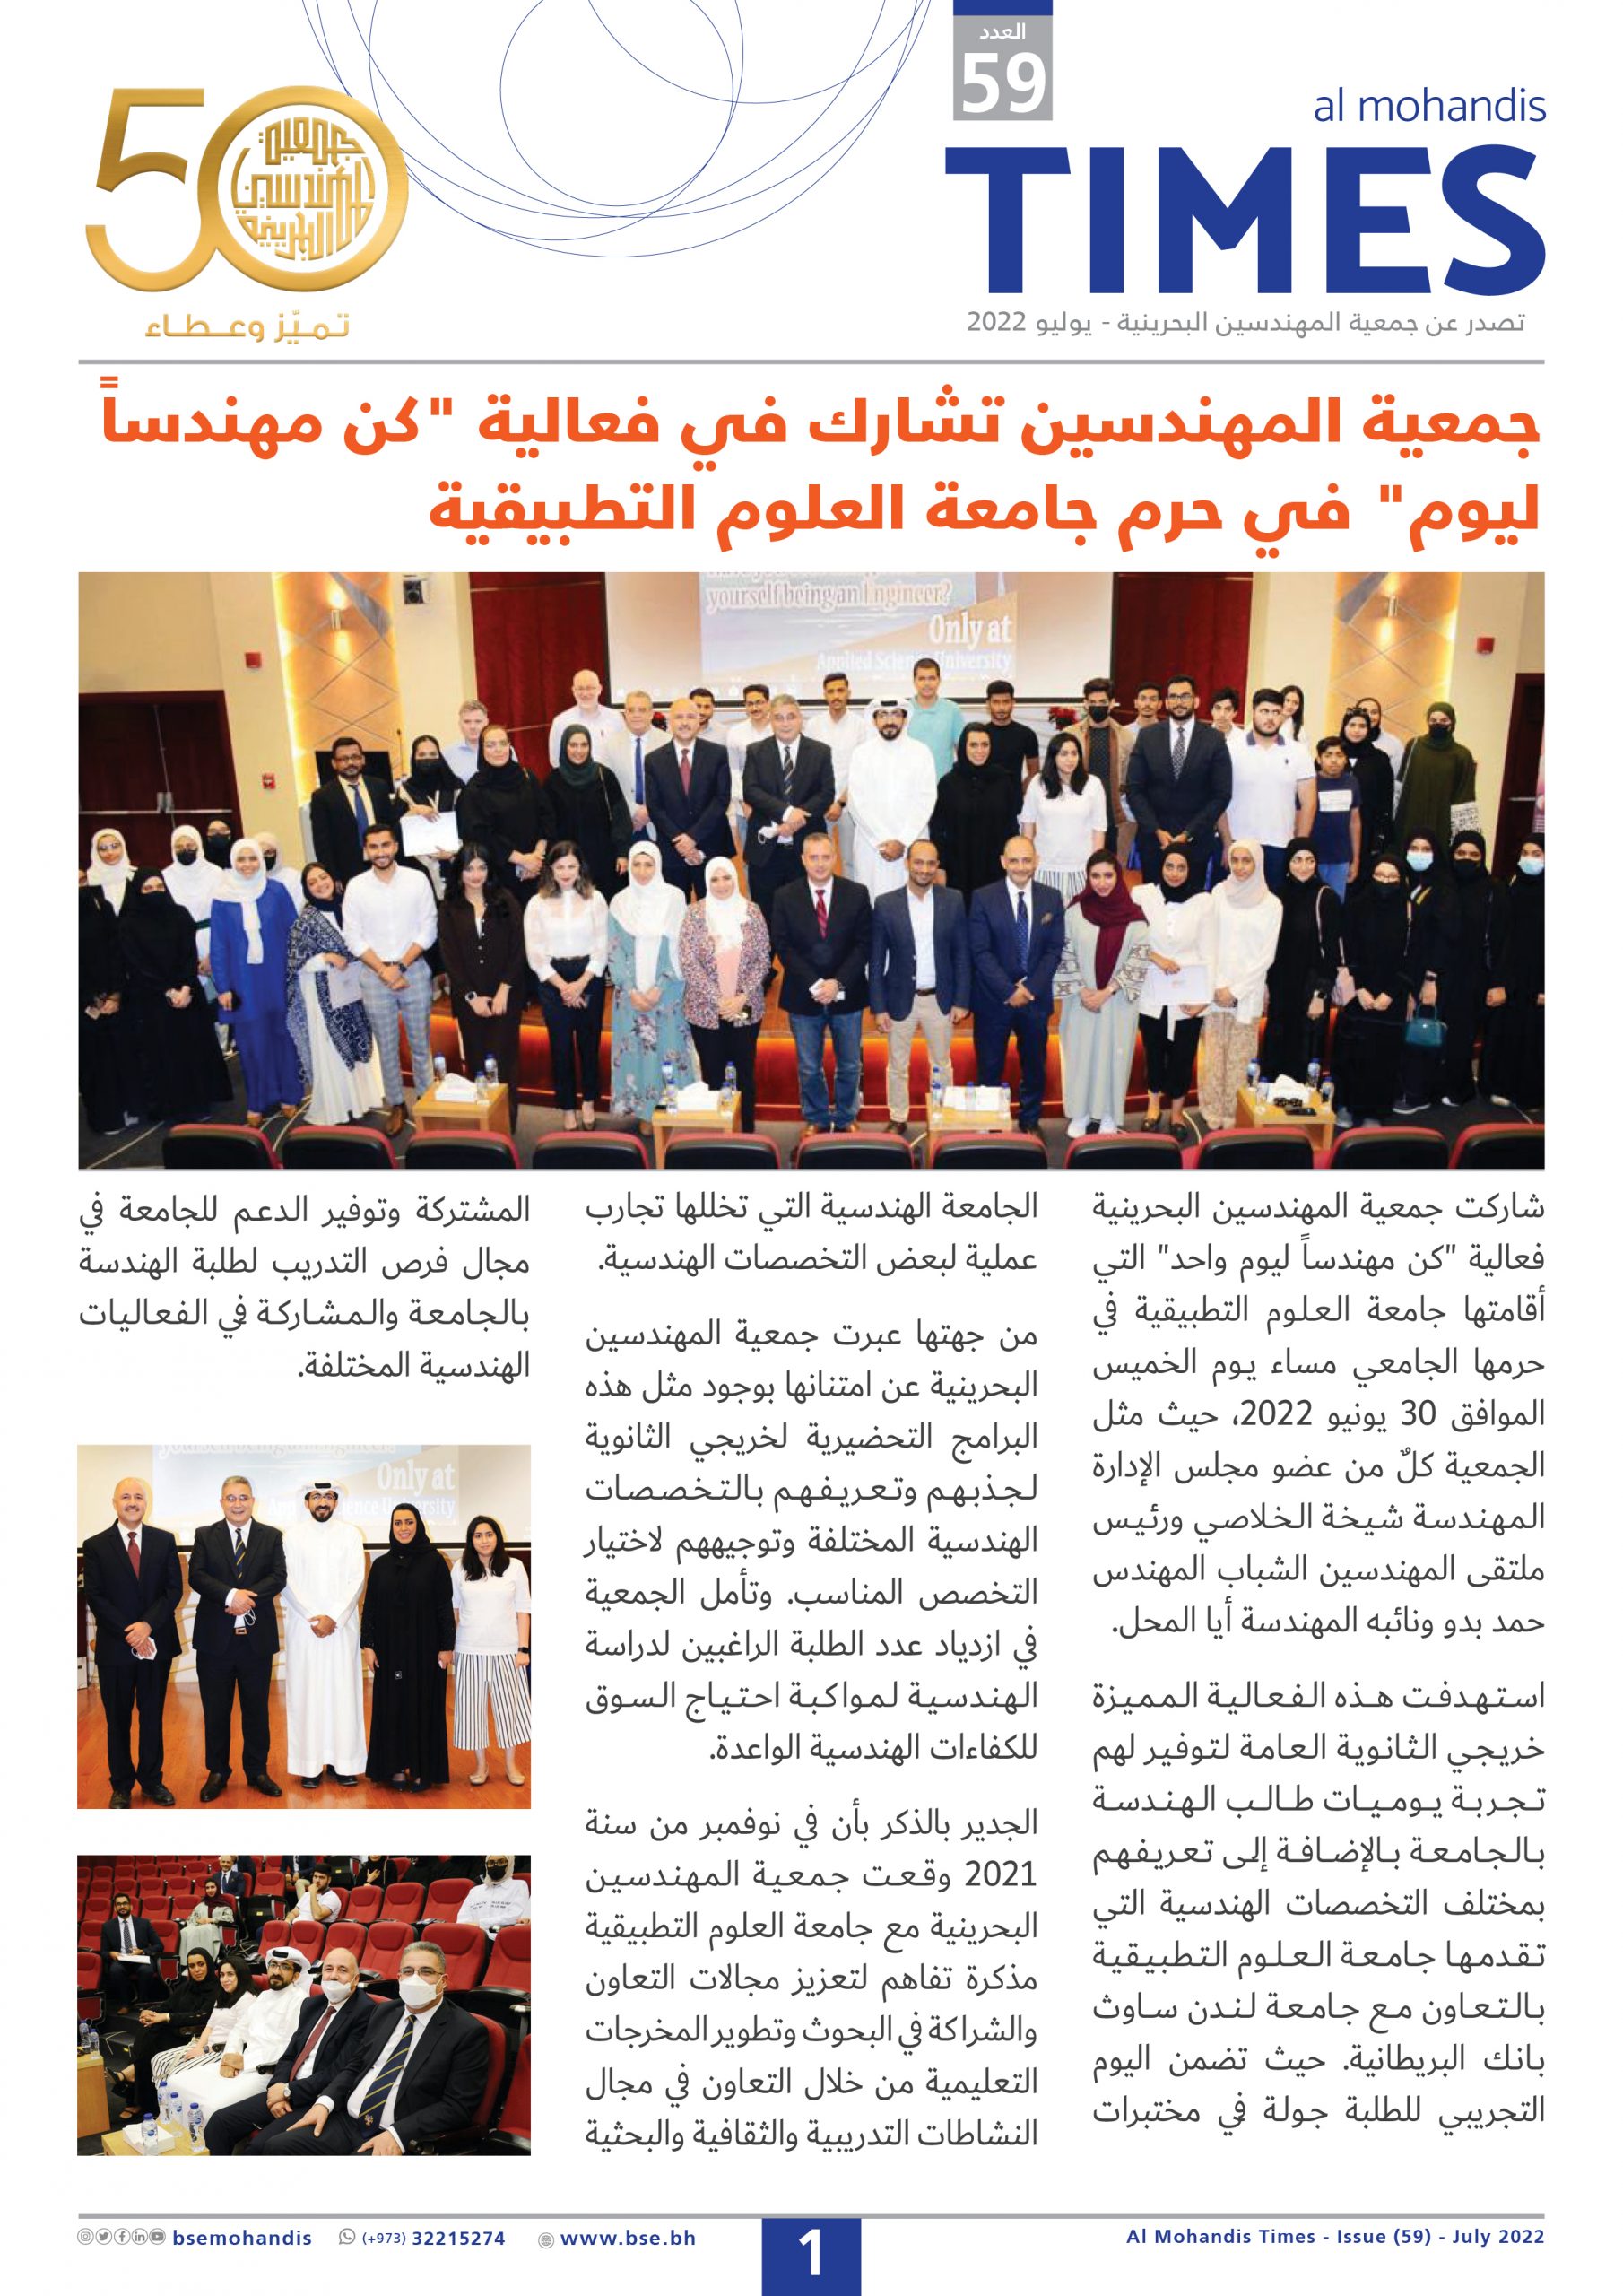 Al Mohandis Times Issue 59